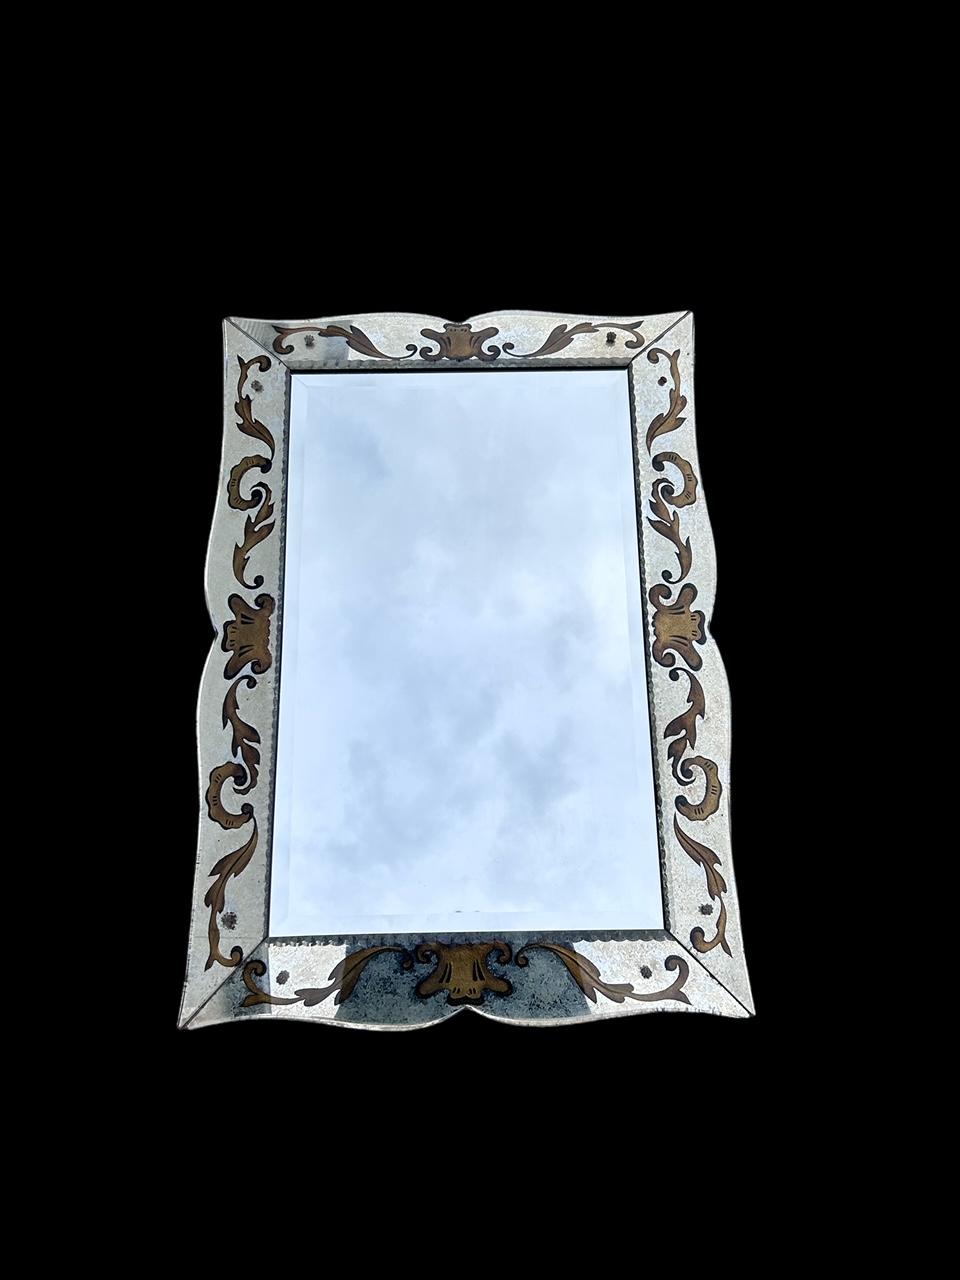 beautiful art deco mirror in verre eglomisé with a painted decor from the 1940's
missing one little glass flower 